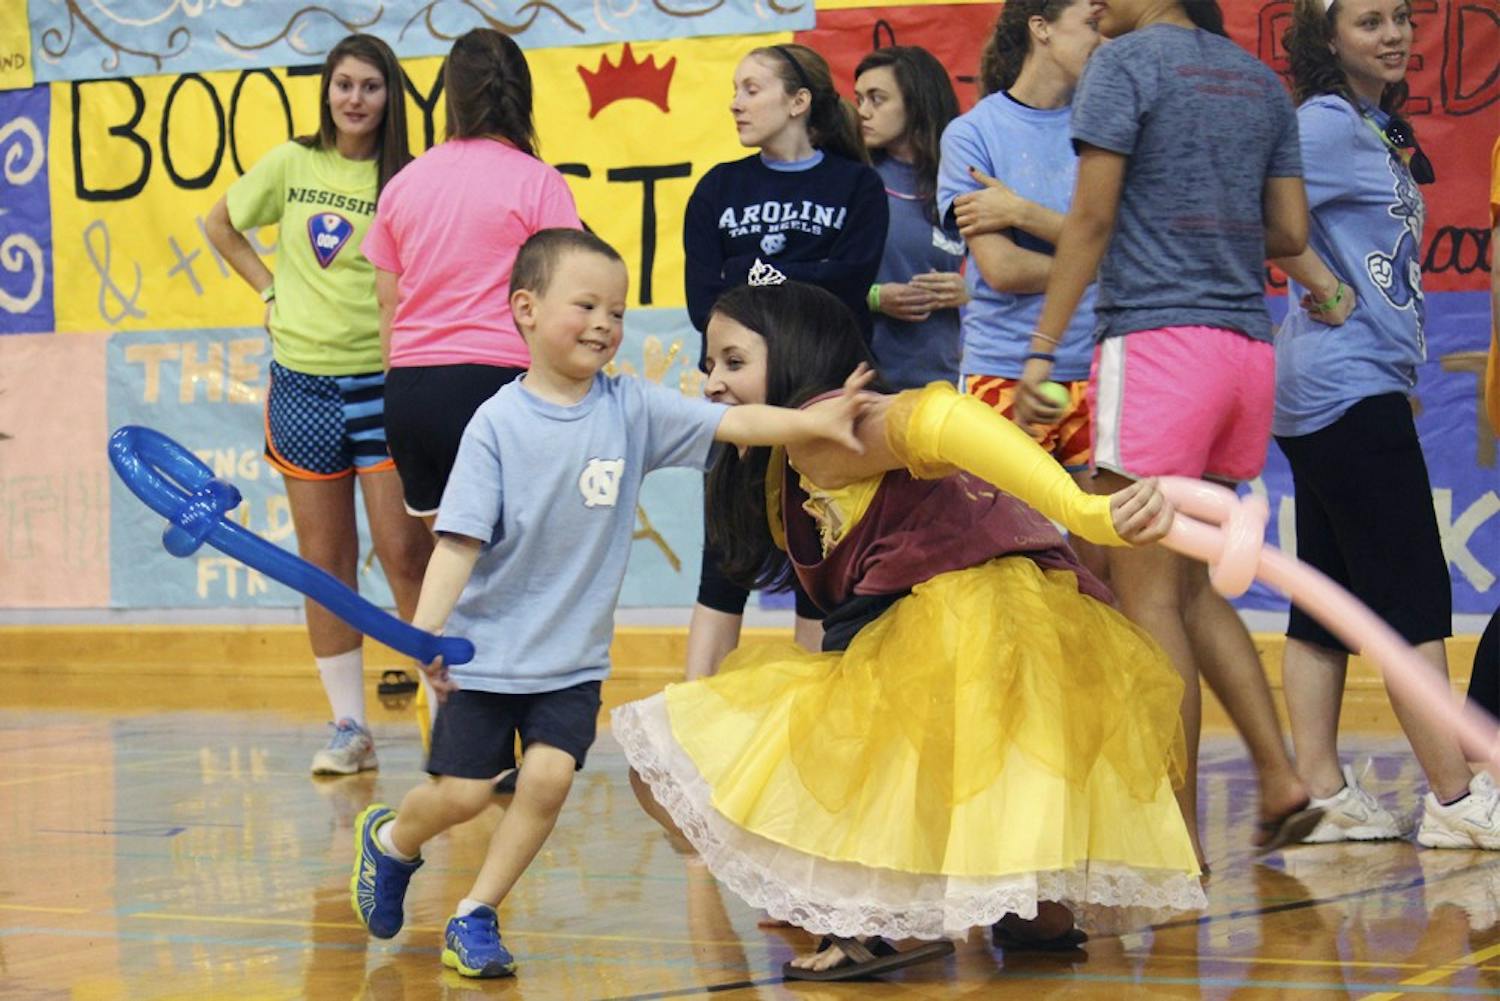 UNC's annual 24-hour standing and dancing Dance Marathon took place on March 21 and 22. The organization ended up raising 551, 595.87 dollars for the patients and families at UNC's Childrens Hospital, passing the half a million mark for the first time in history. Pictured: Jake Ellis plays with moral and kid co-captain Katie Quine. 